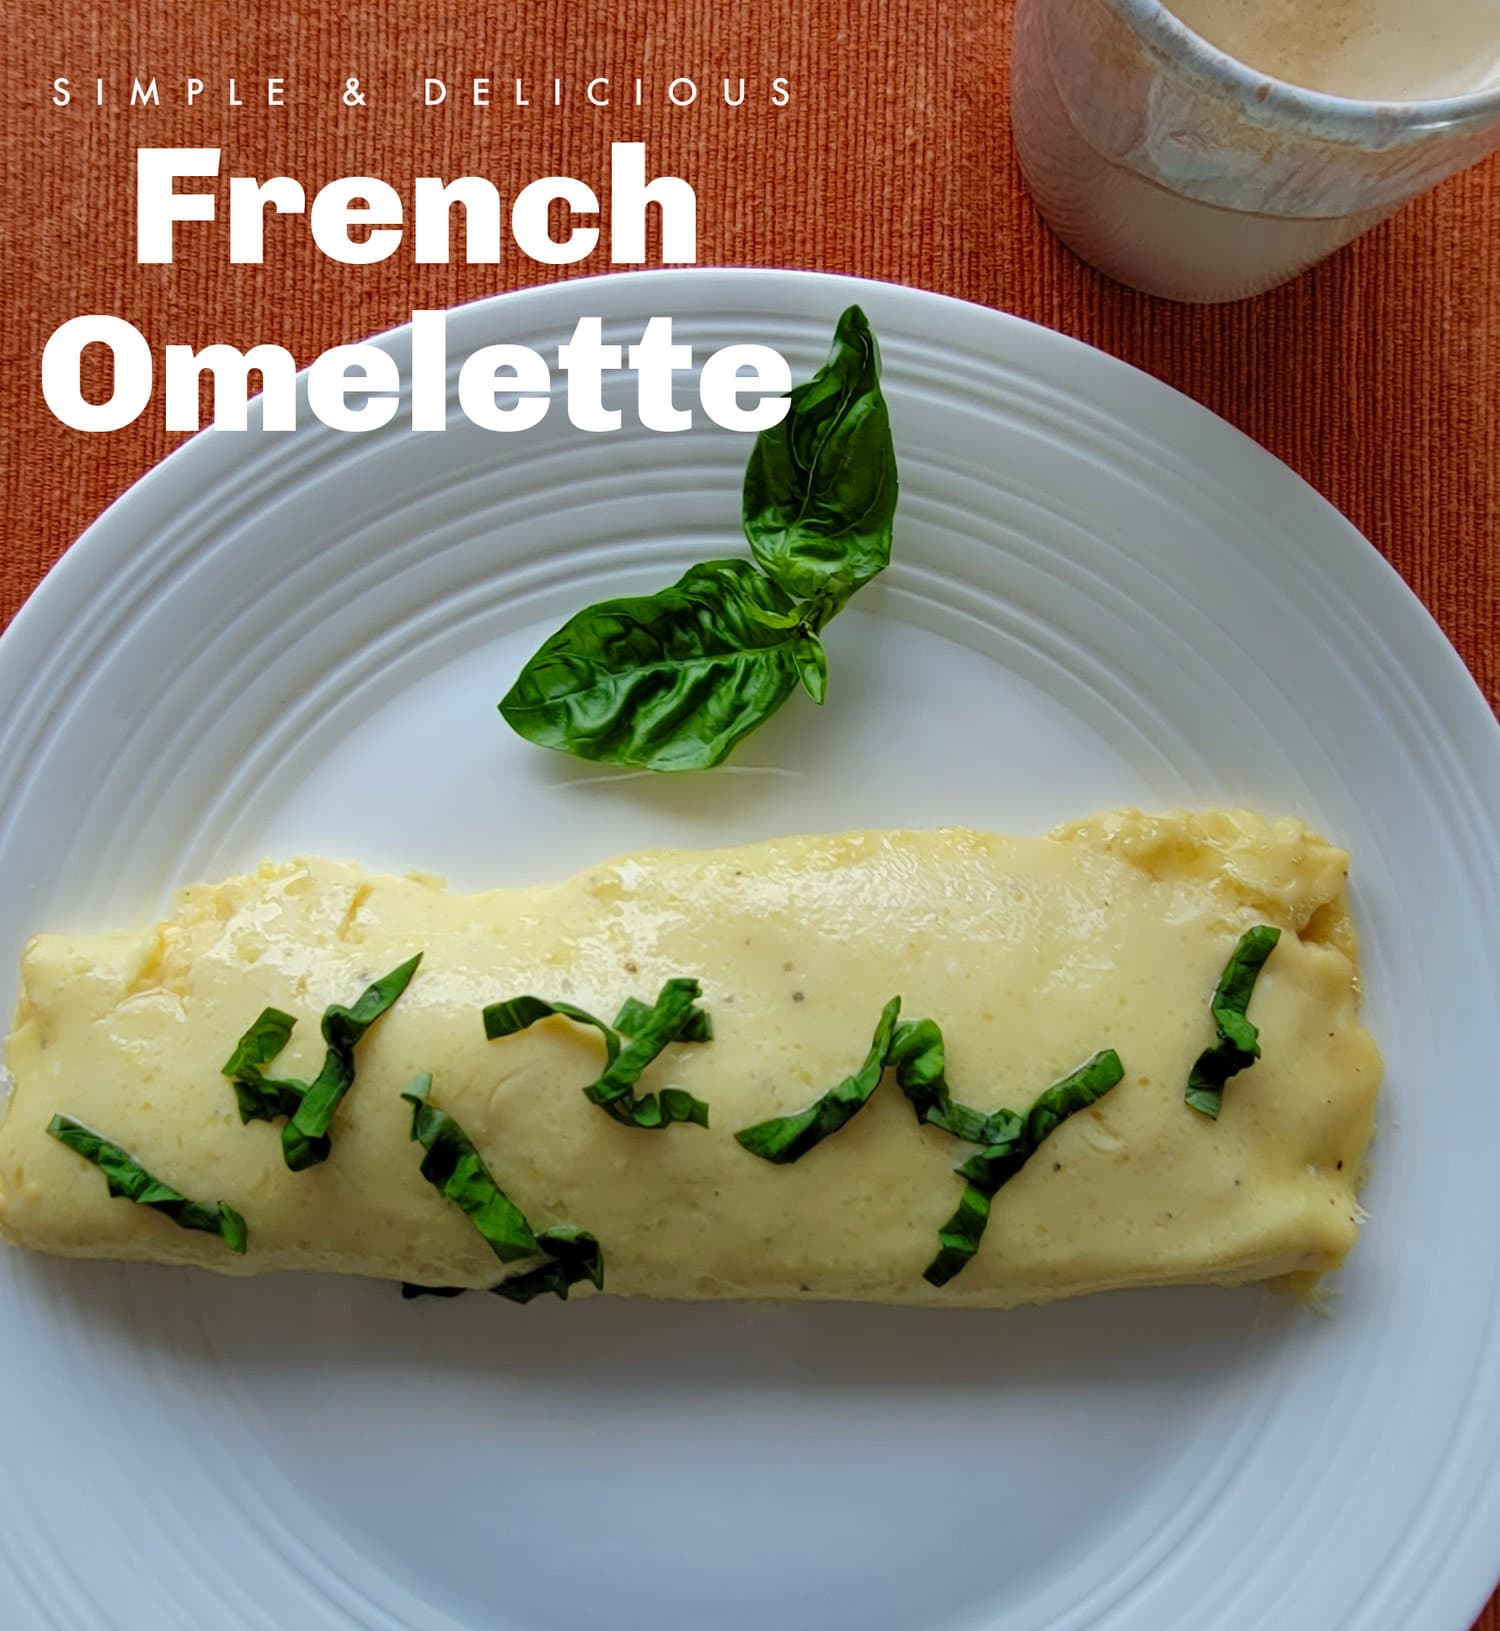 https://theculinarychase.com/wp-content/uploads/2022/09/french-omelette.jpg